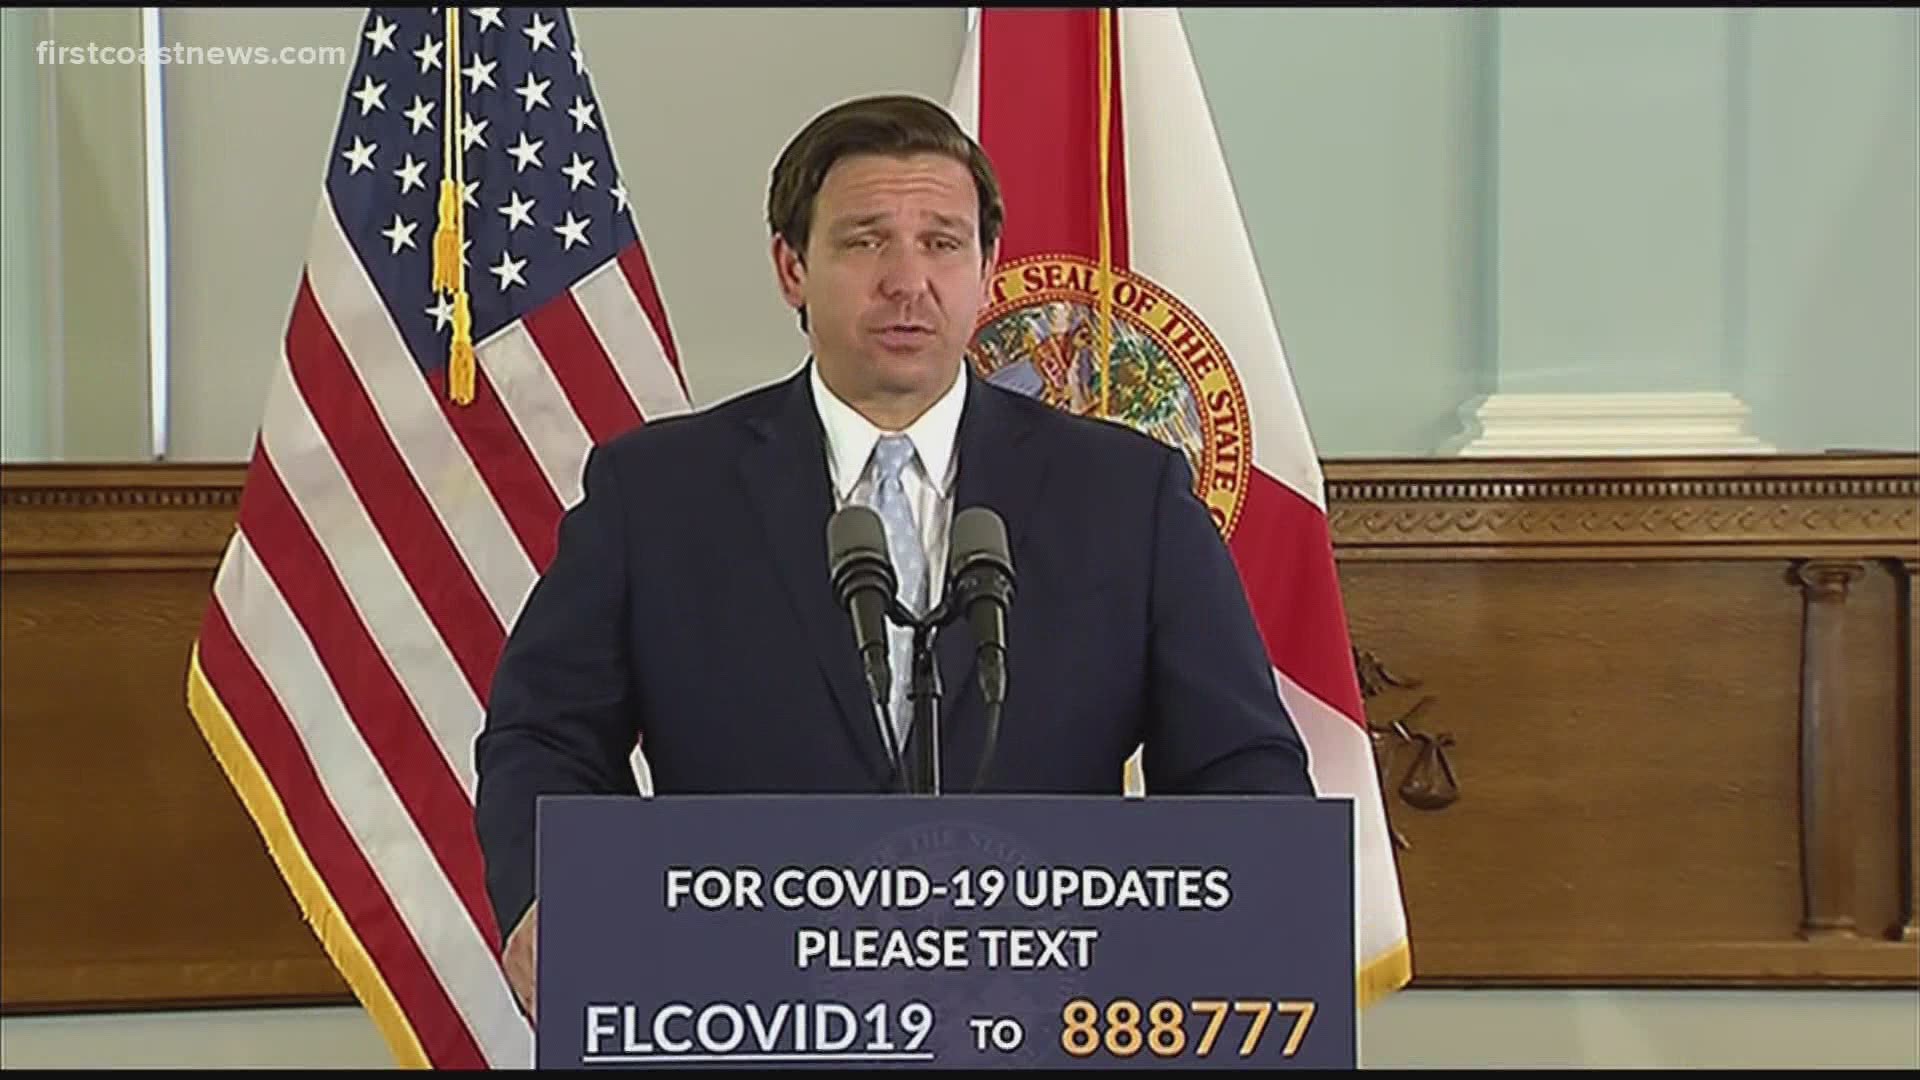 Florida Gov. Ron DeSantis gave an update on the state's COVID-19 response Thursday evening.